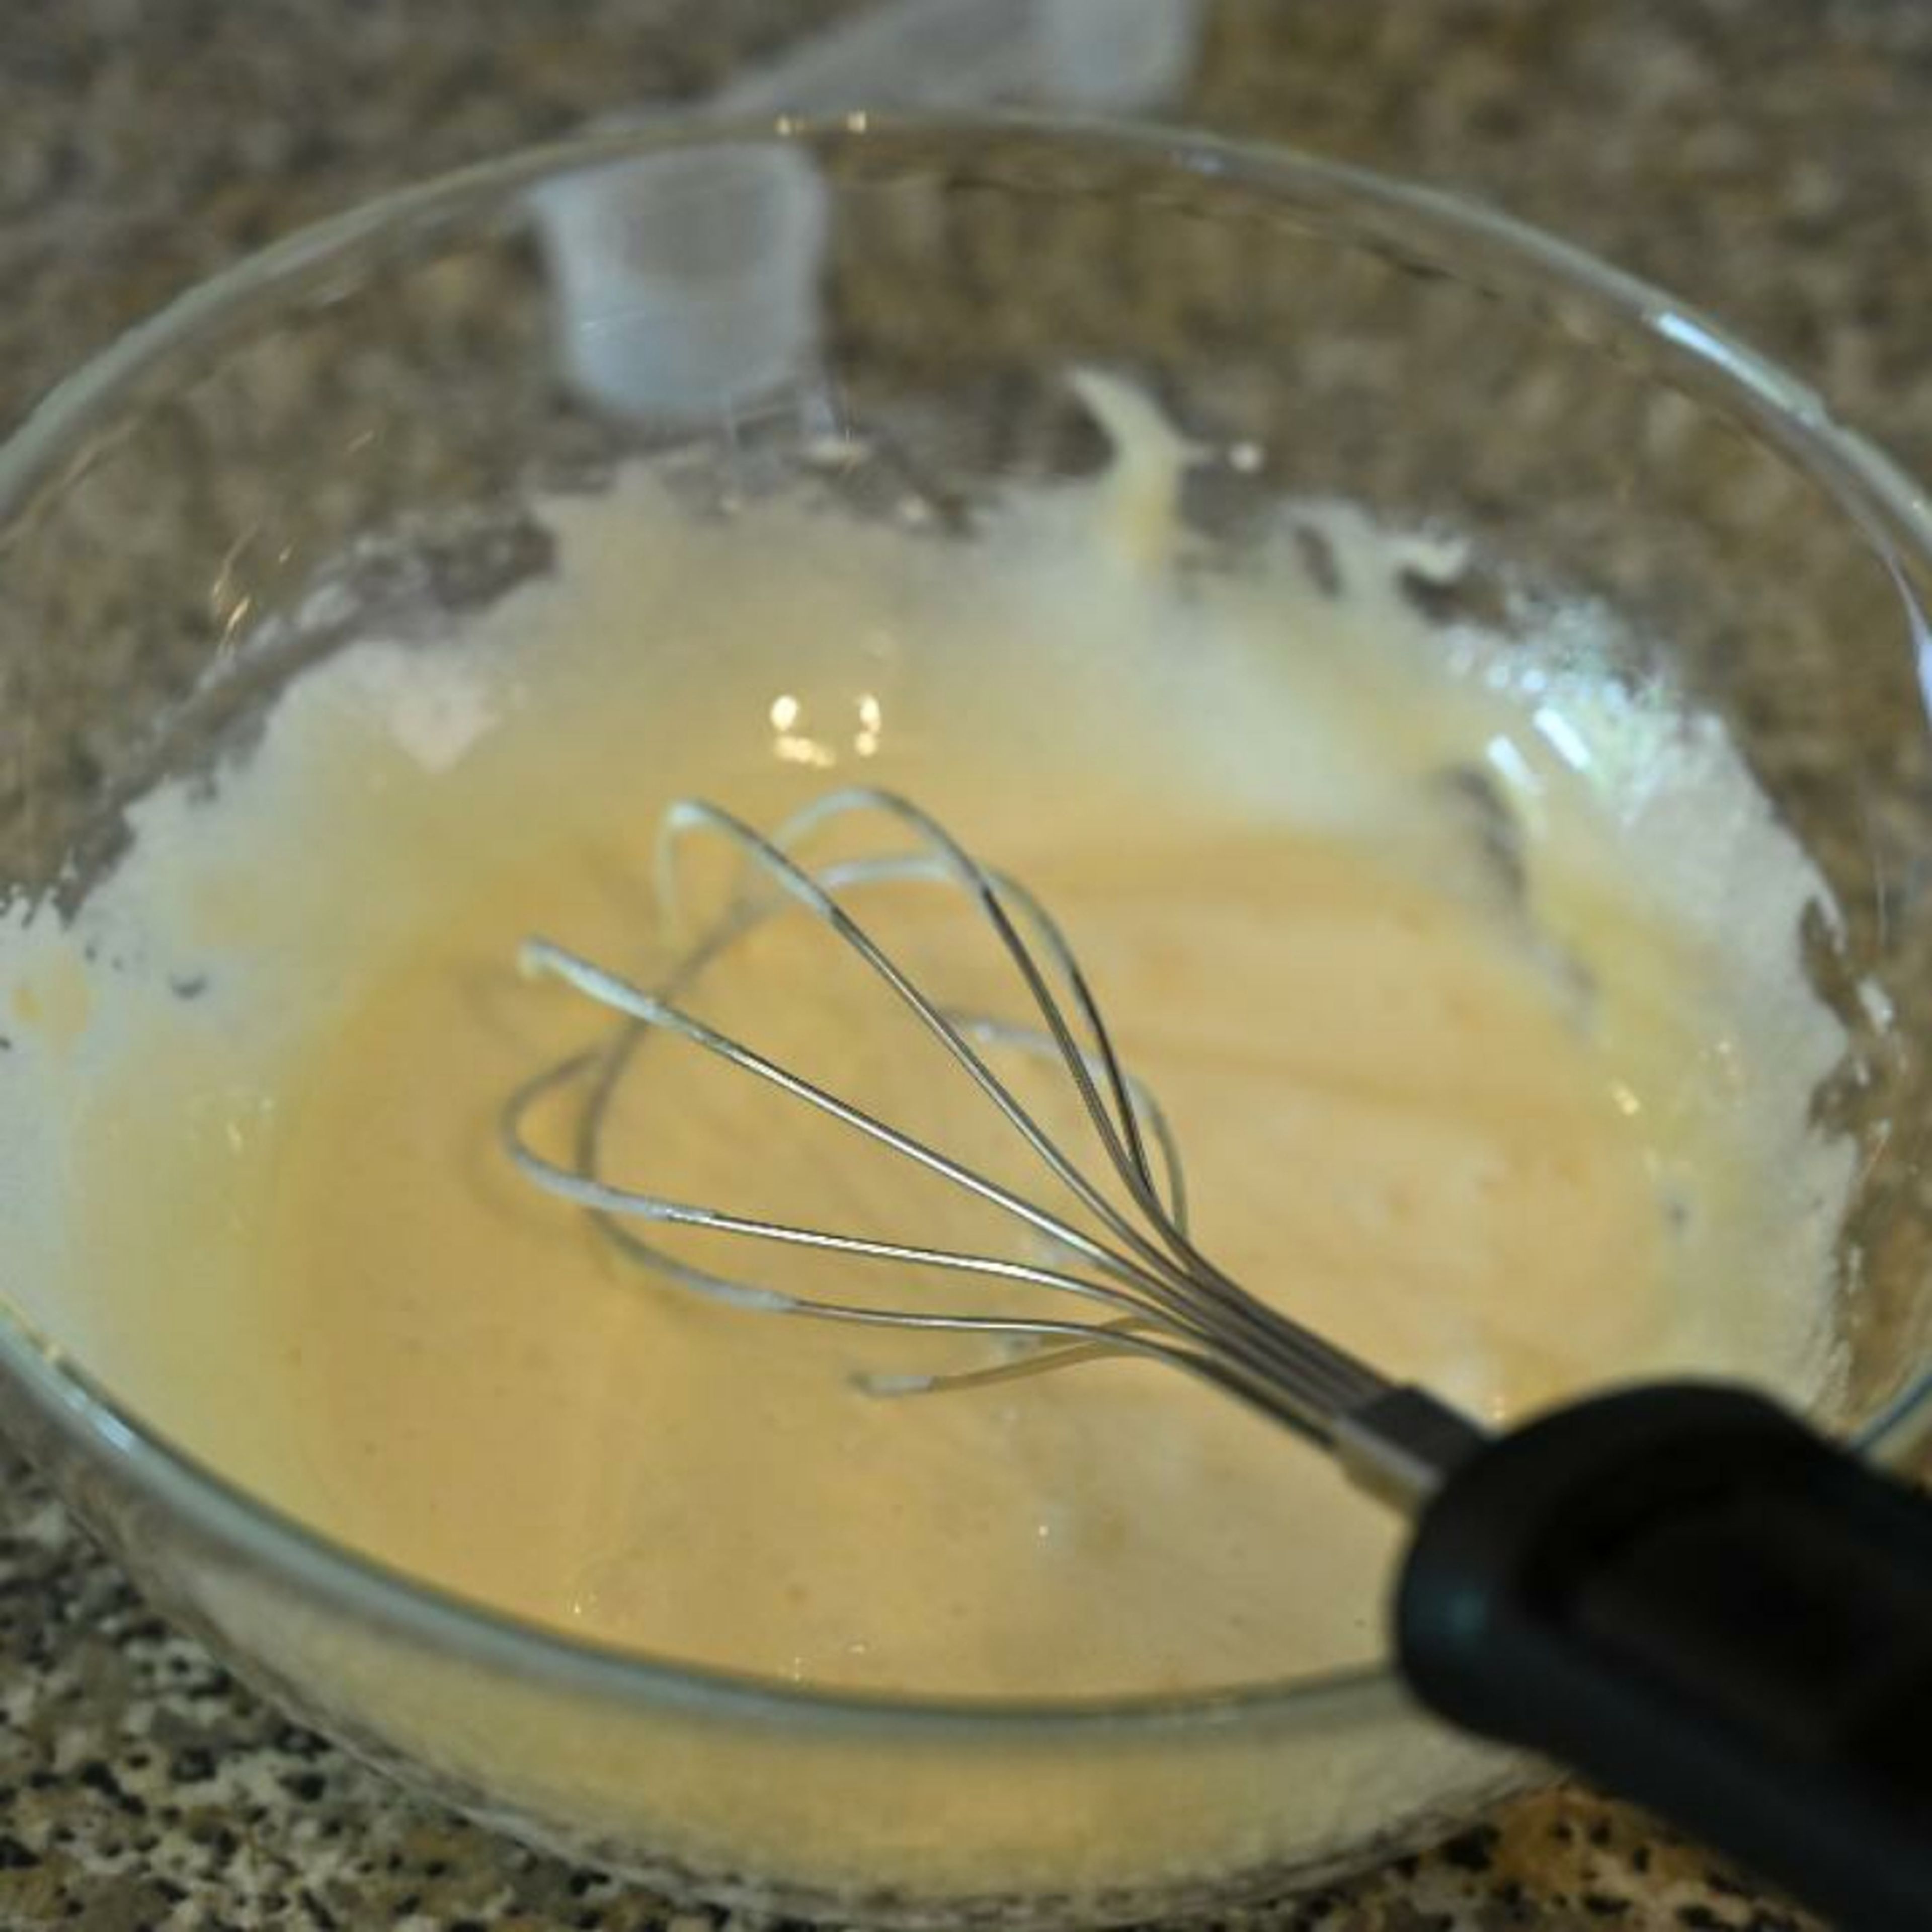 In a large whisk together the egg yolks and sugar, until thick and creamy.